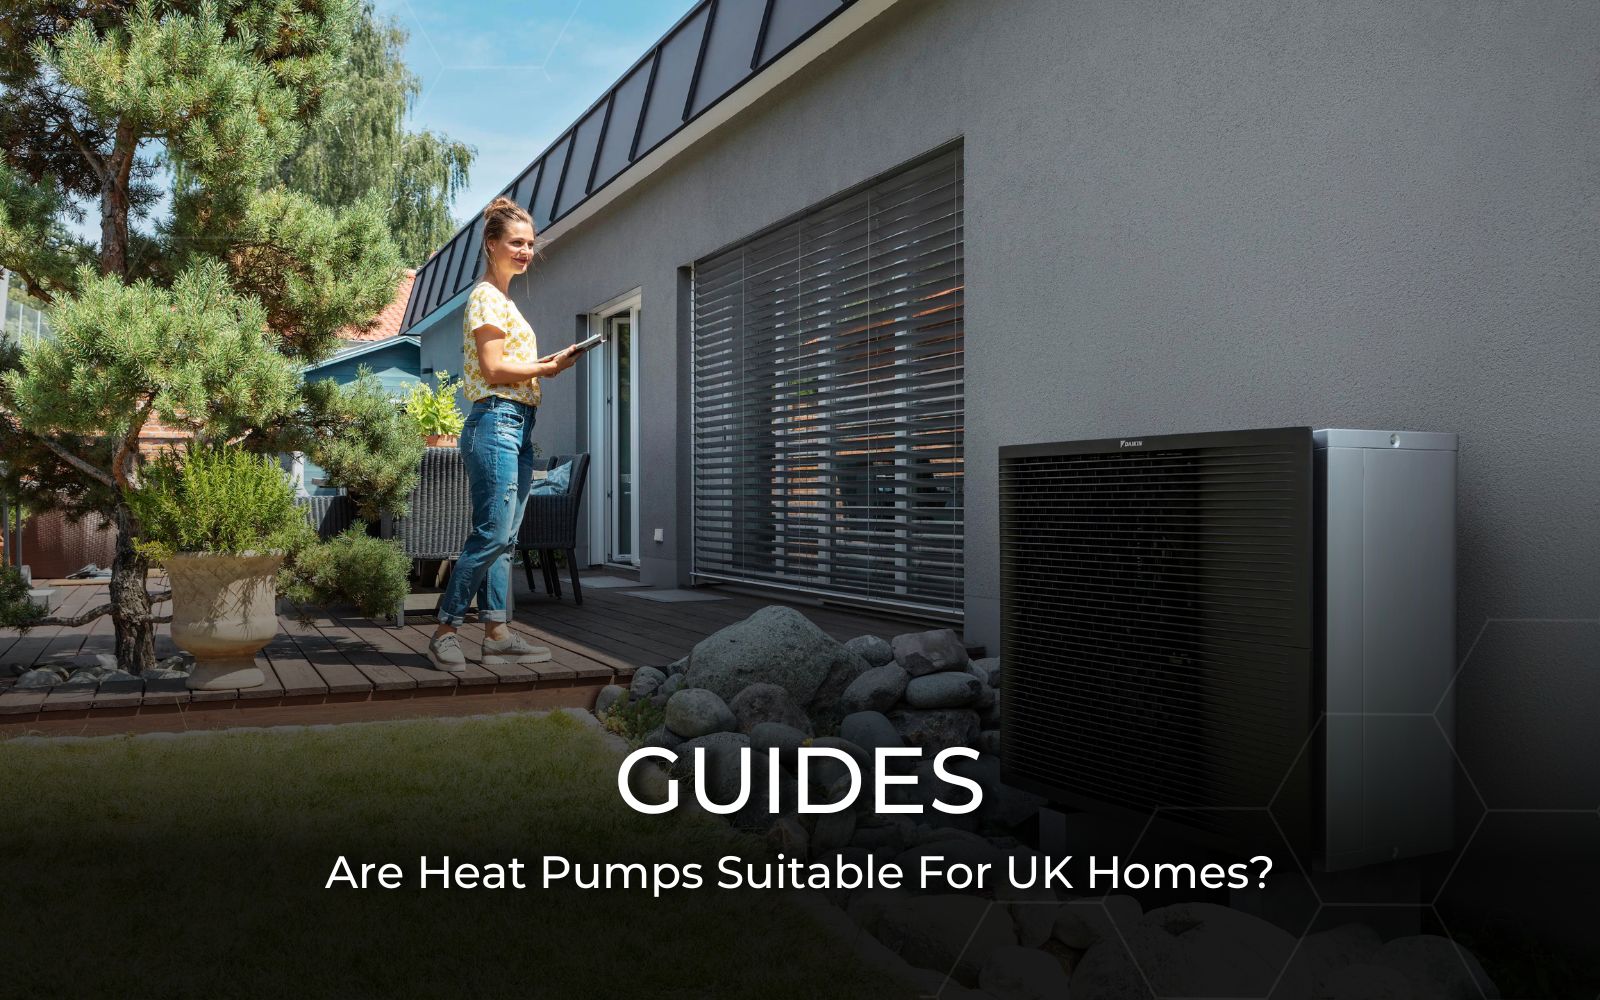 Are heat pumps suitable for UK homes